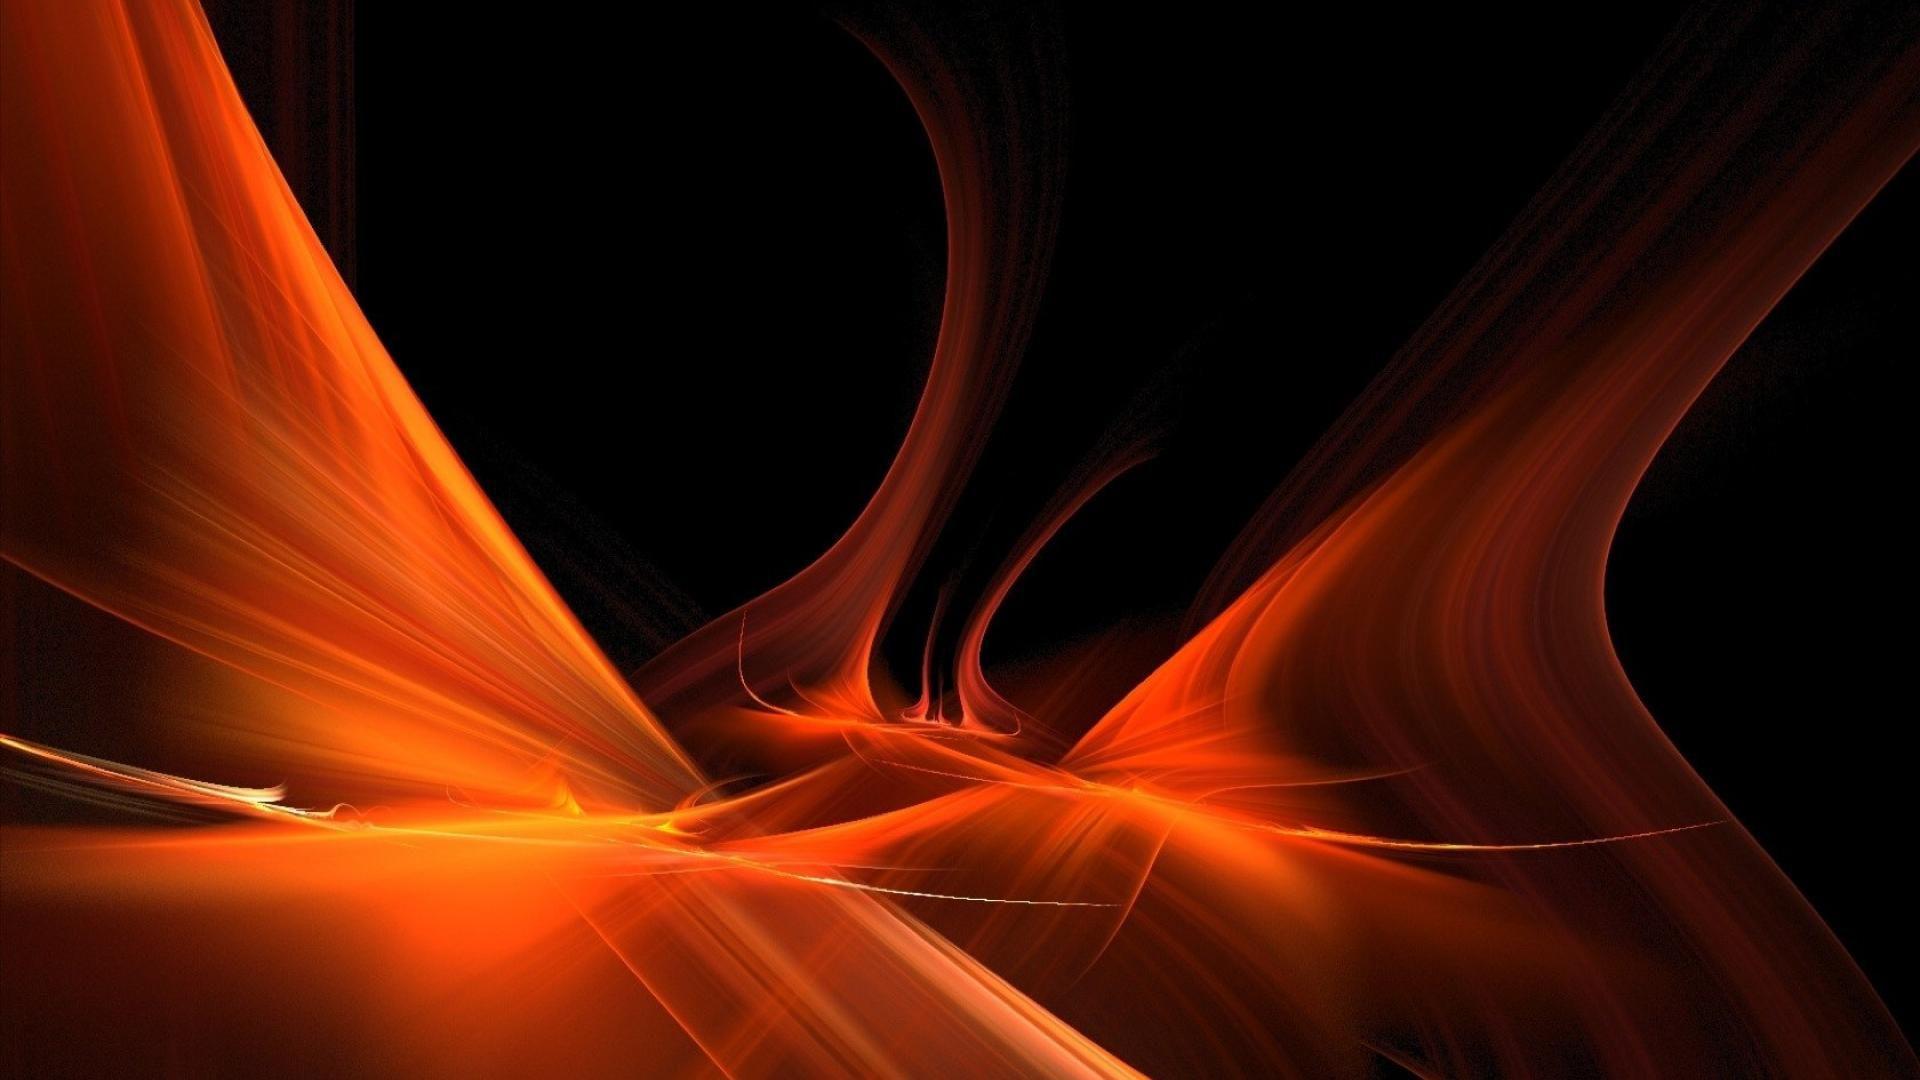 Orange and Red Wallpaper  Free Stock Photo